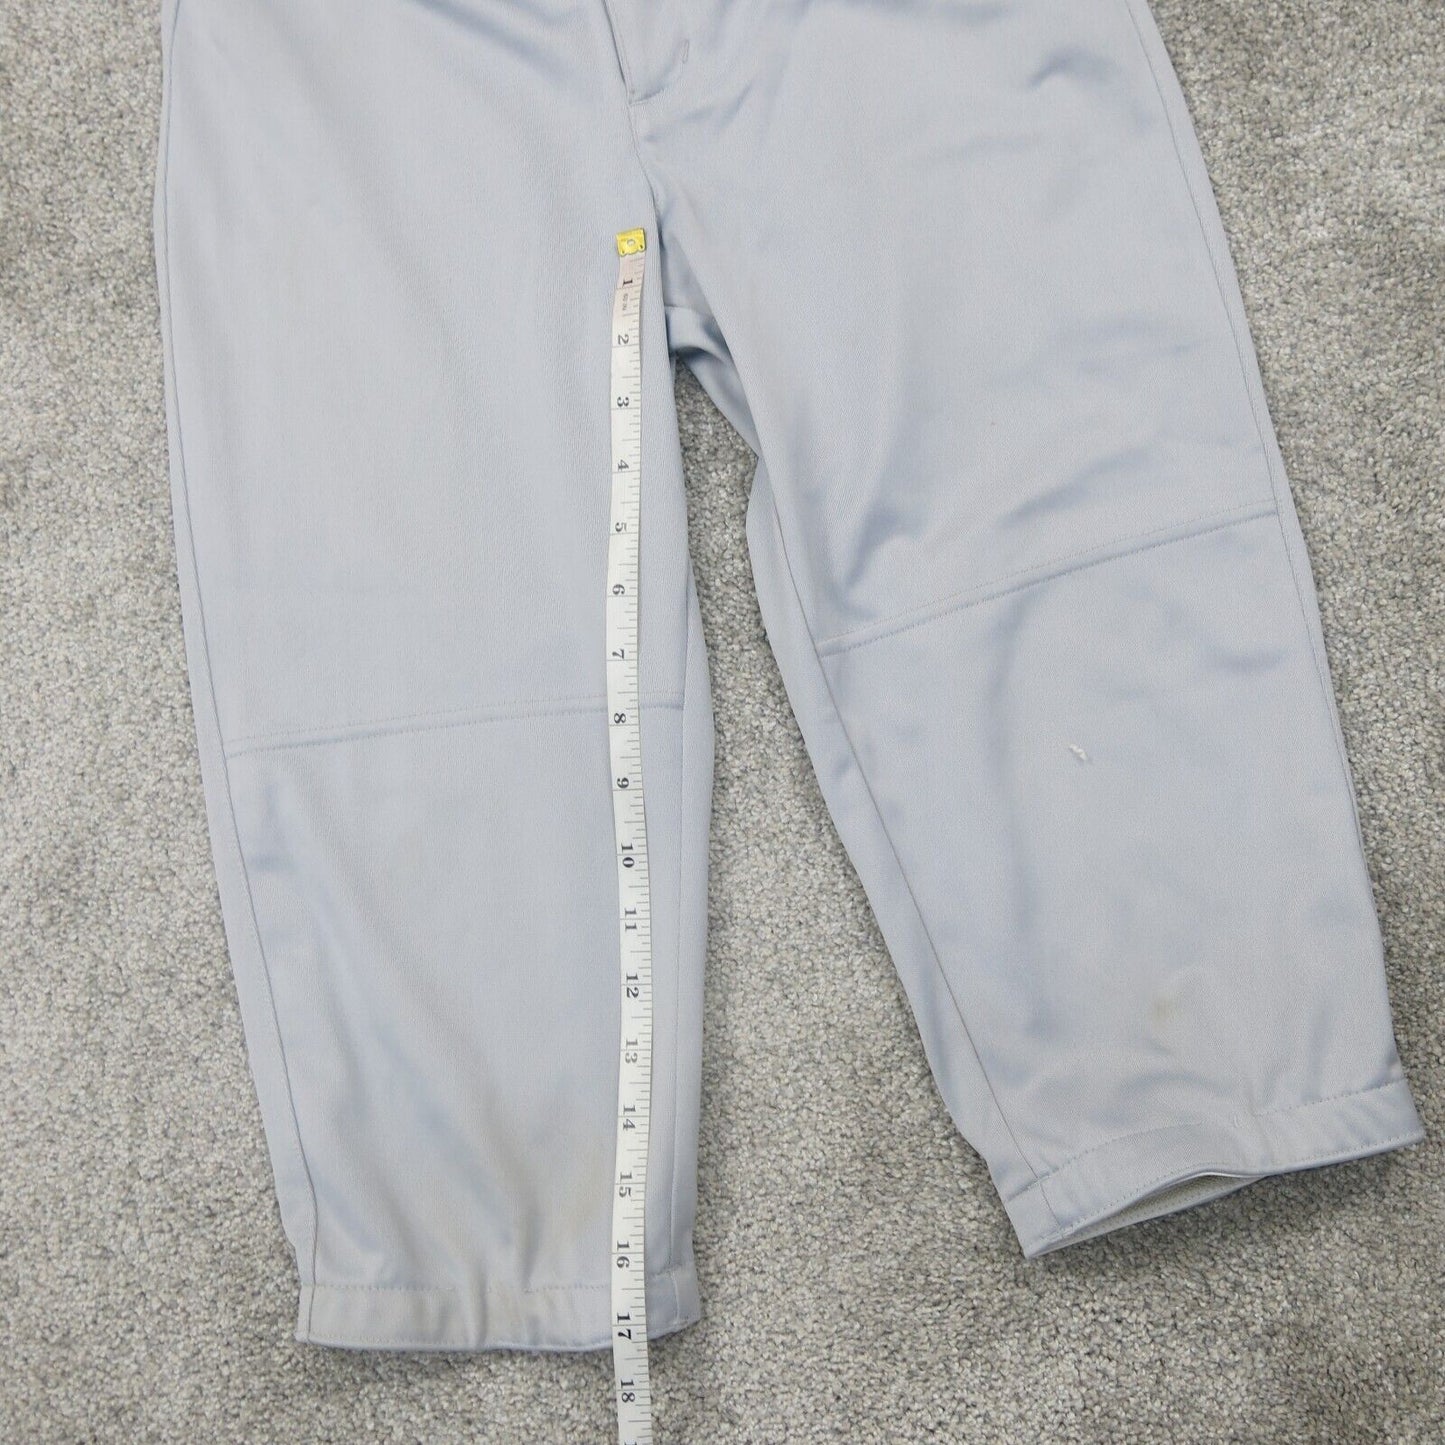 Nike Womens Dry Fit  Sweatpants Athletic Training Gym Silver Size Large